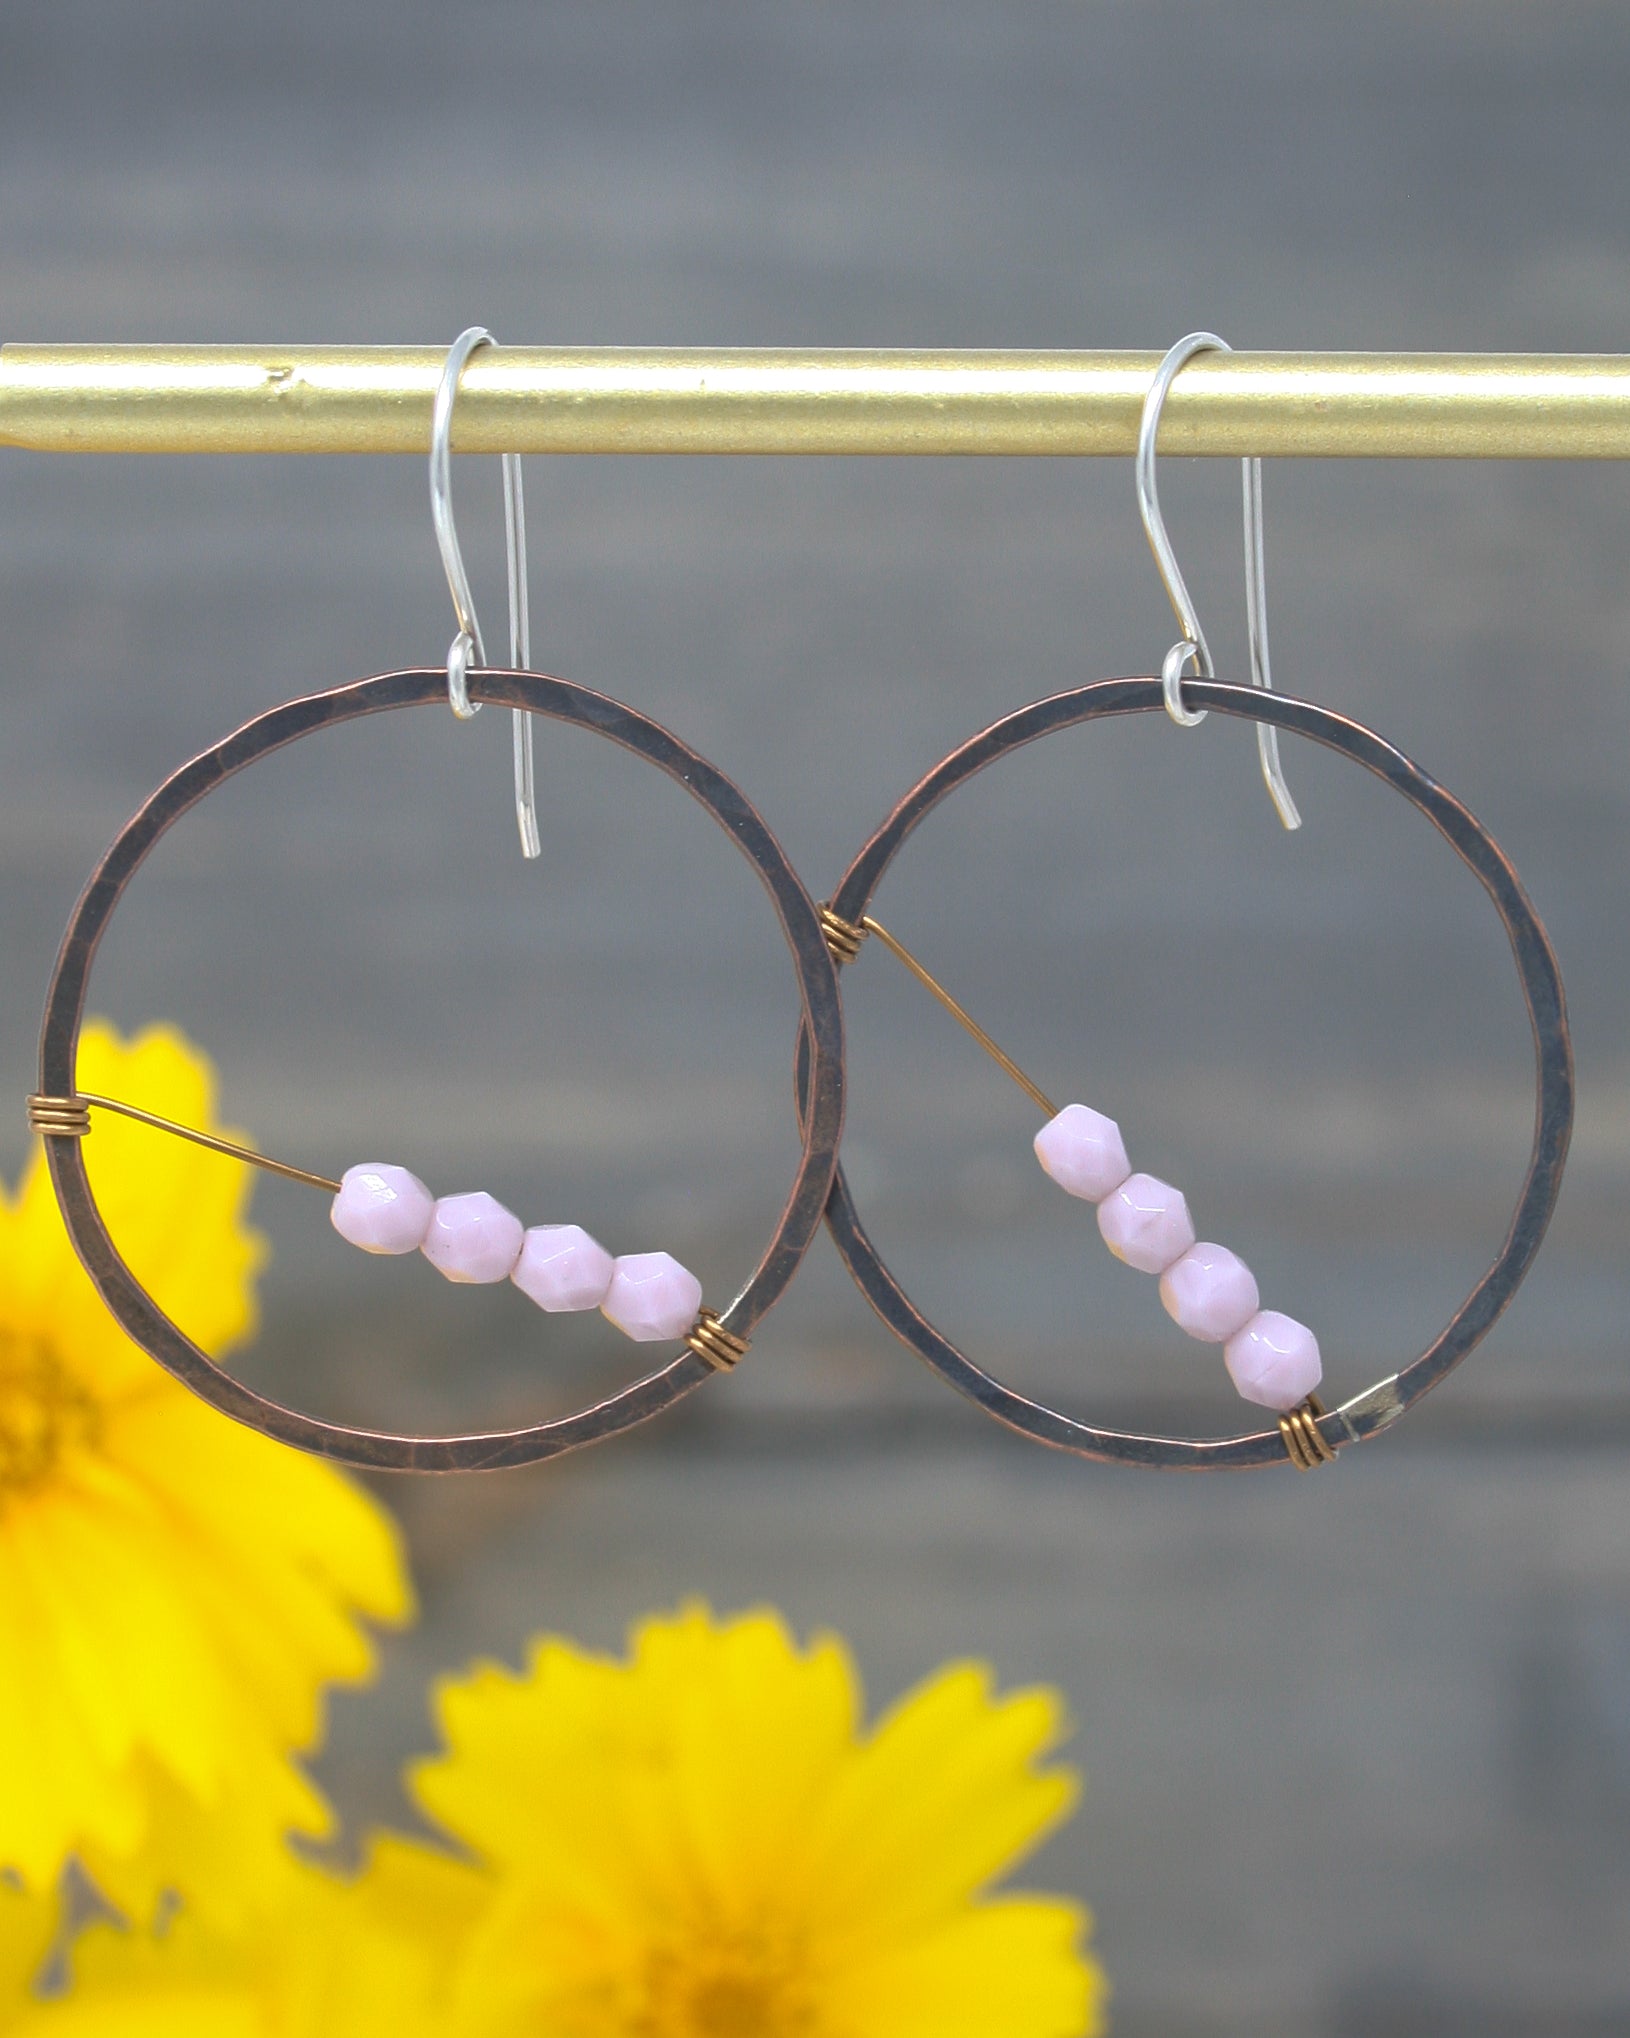 a pair of hoops with beads hanging from them